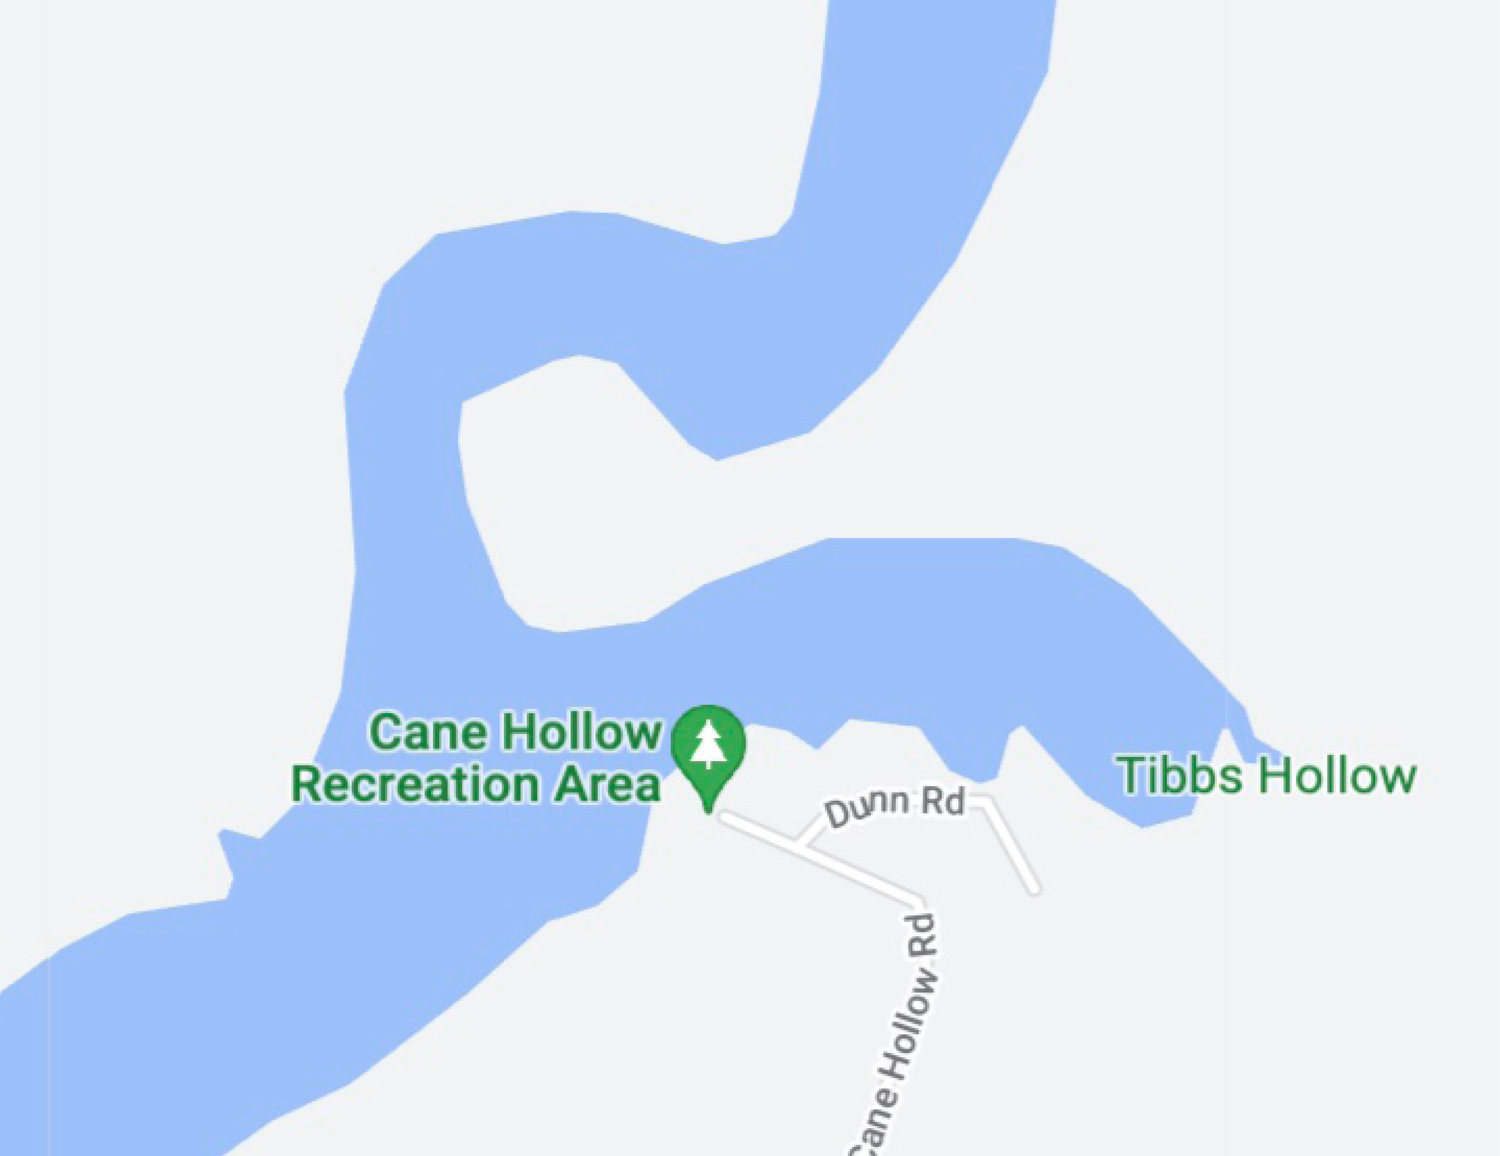 County commission chairman Stanley Neal said he would like to see the Cane Hollow Recreational Facility added to the master plan.